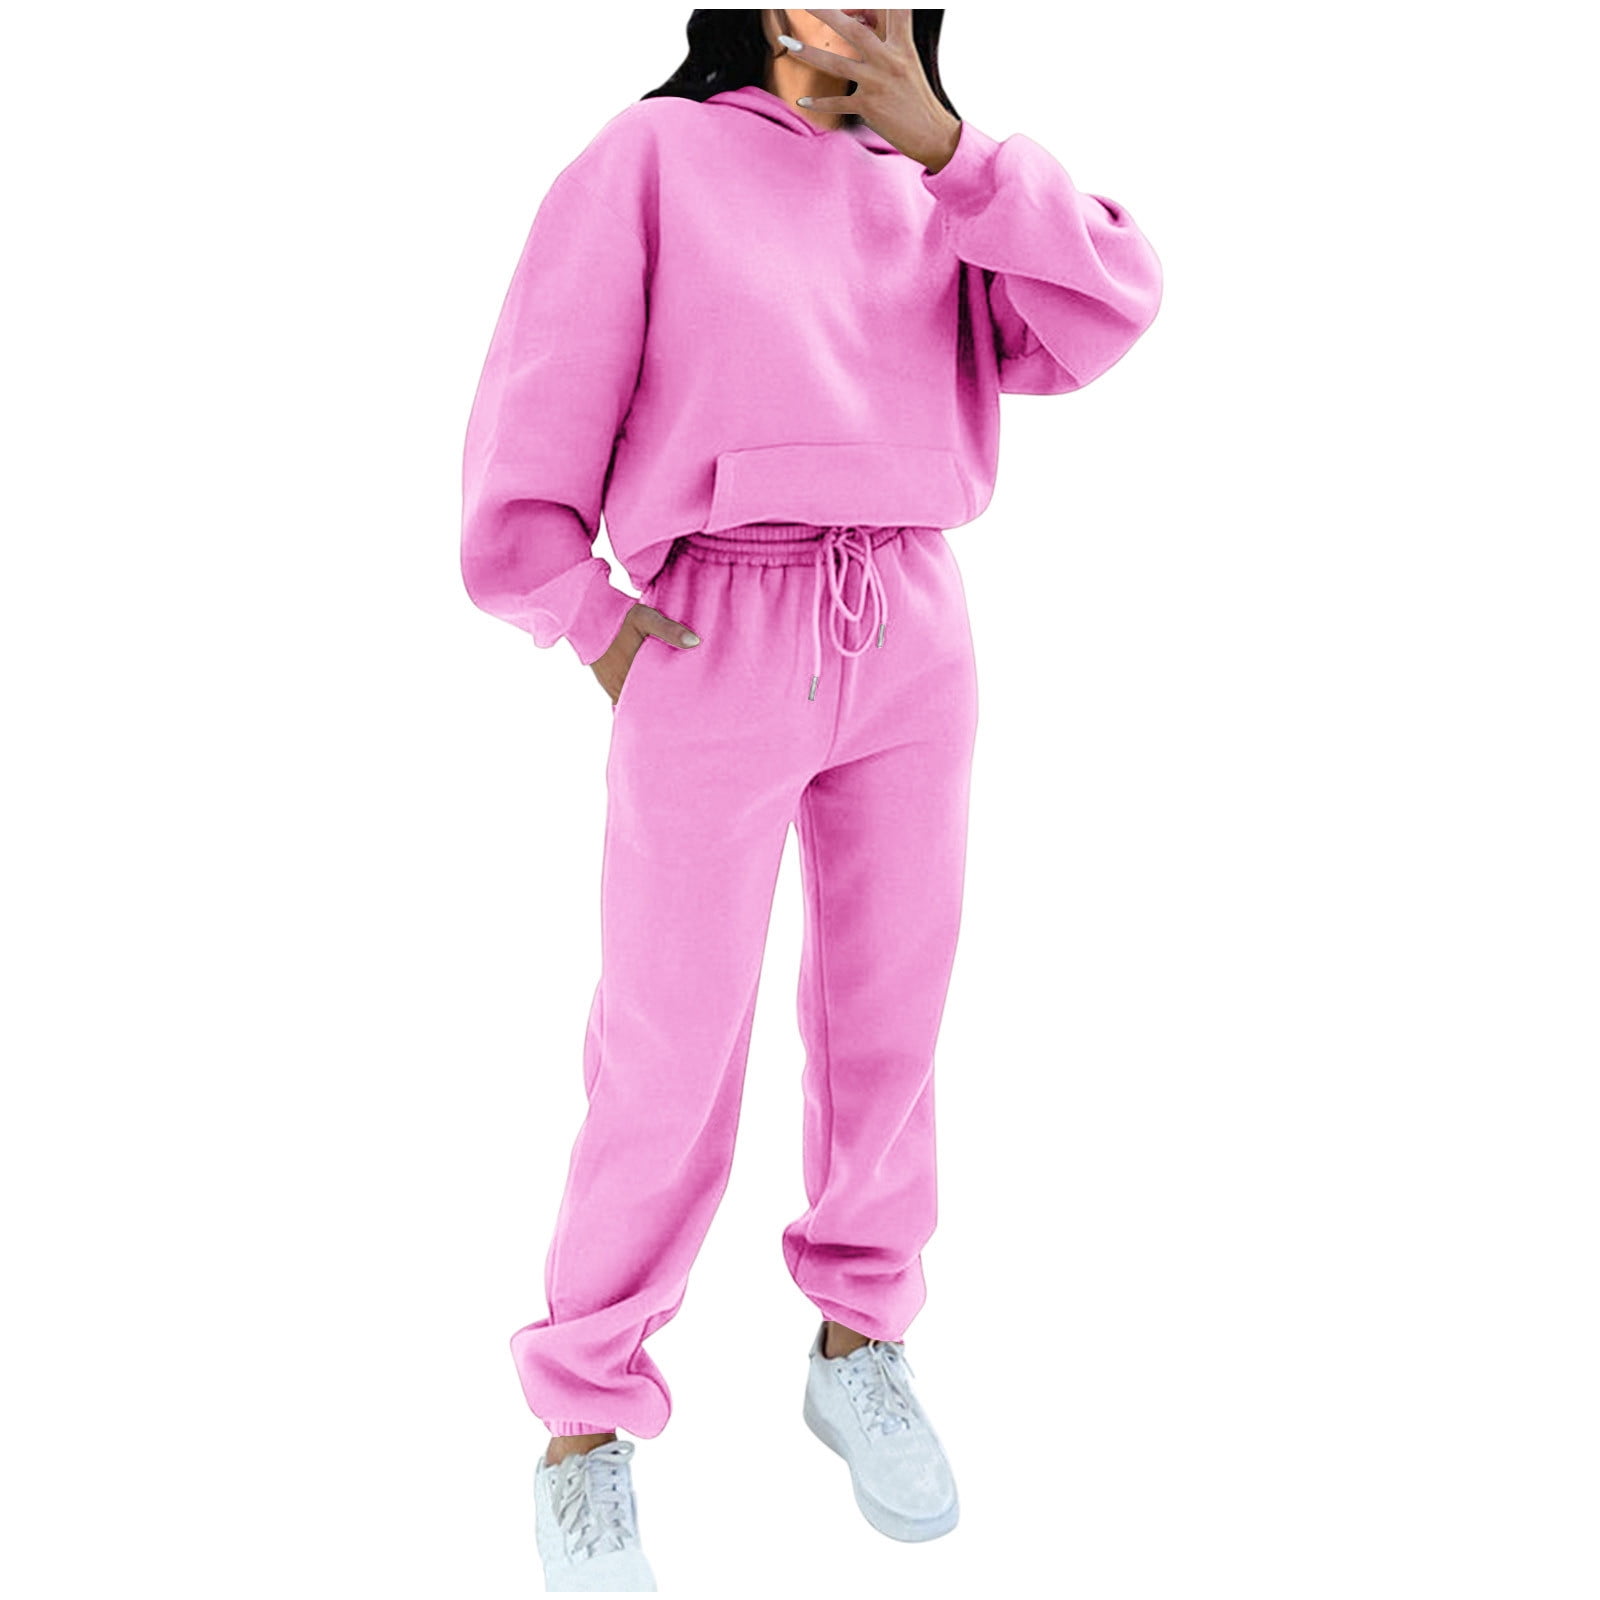 2 Piece Cotton Sweatsuits for Women with Hood Pocket Workout Sports Outfits  Fleece Hoodie and Jogger Pant Sets (Large, Pink)